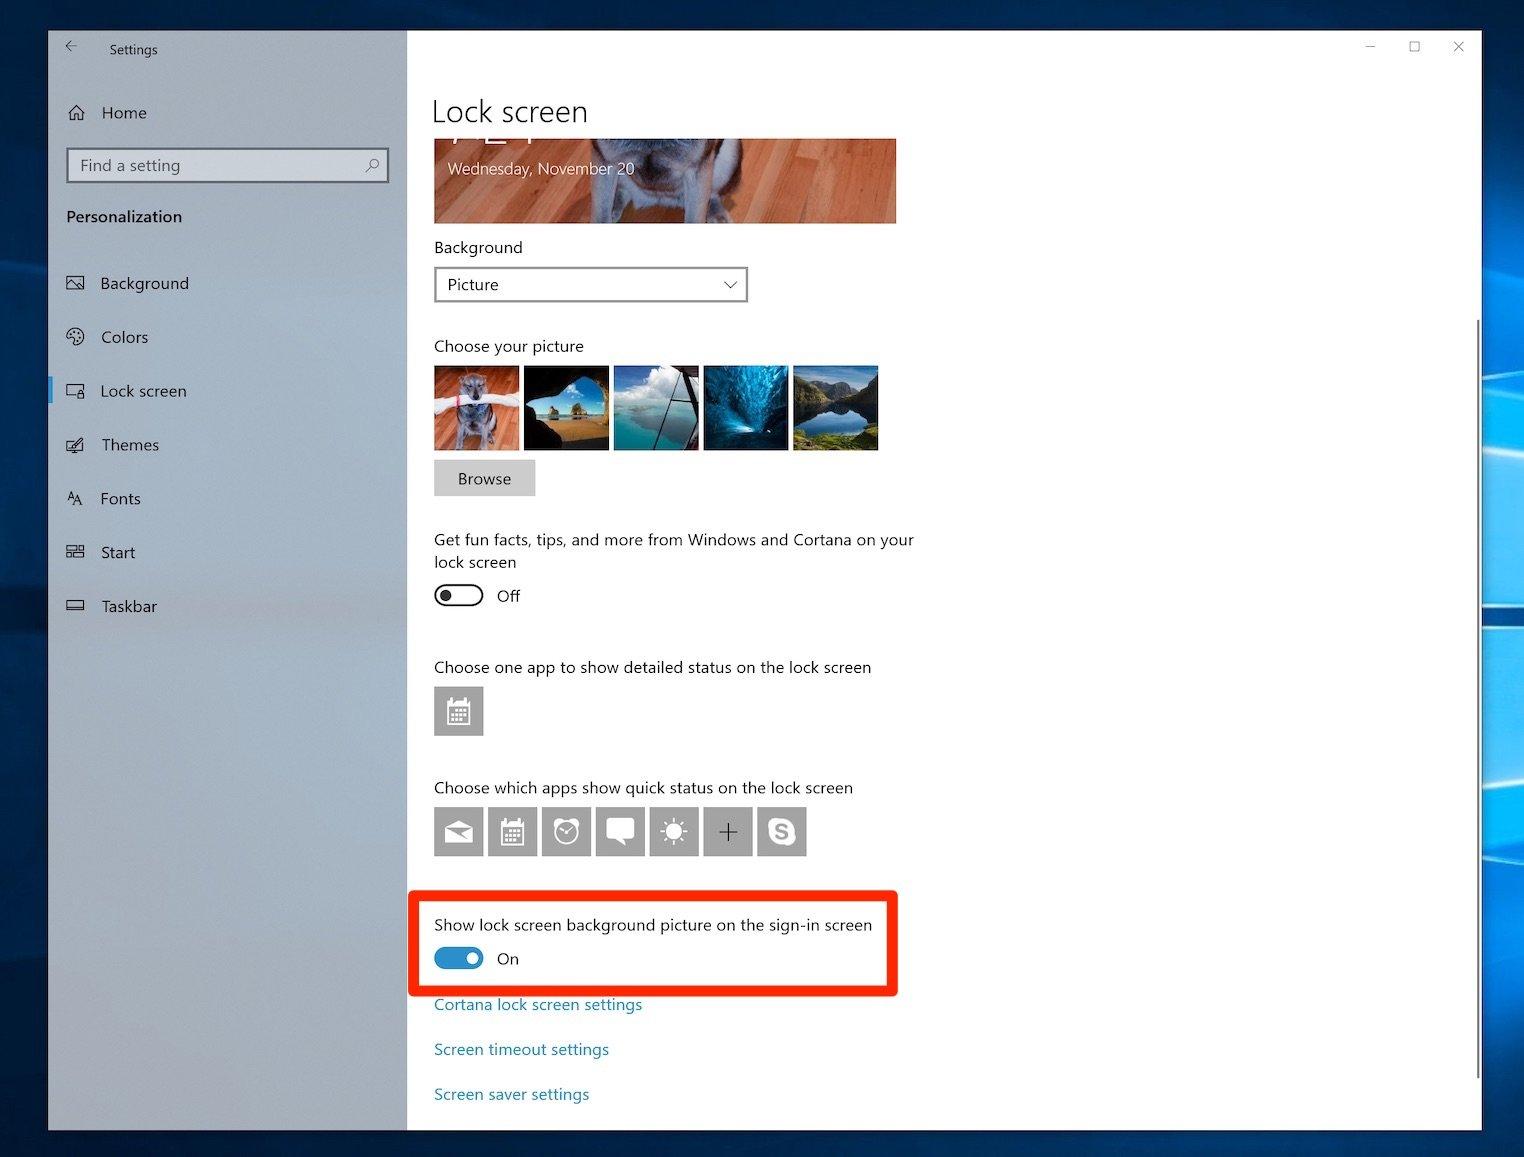 How To Change Your Windows 10 Login Screen To Display Any Image When